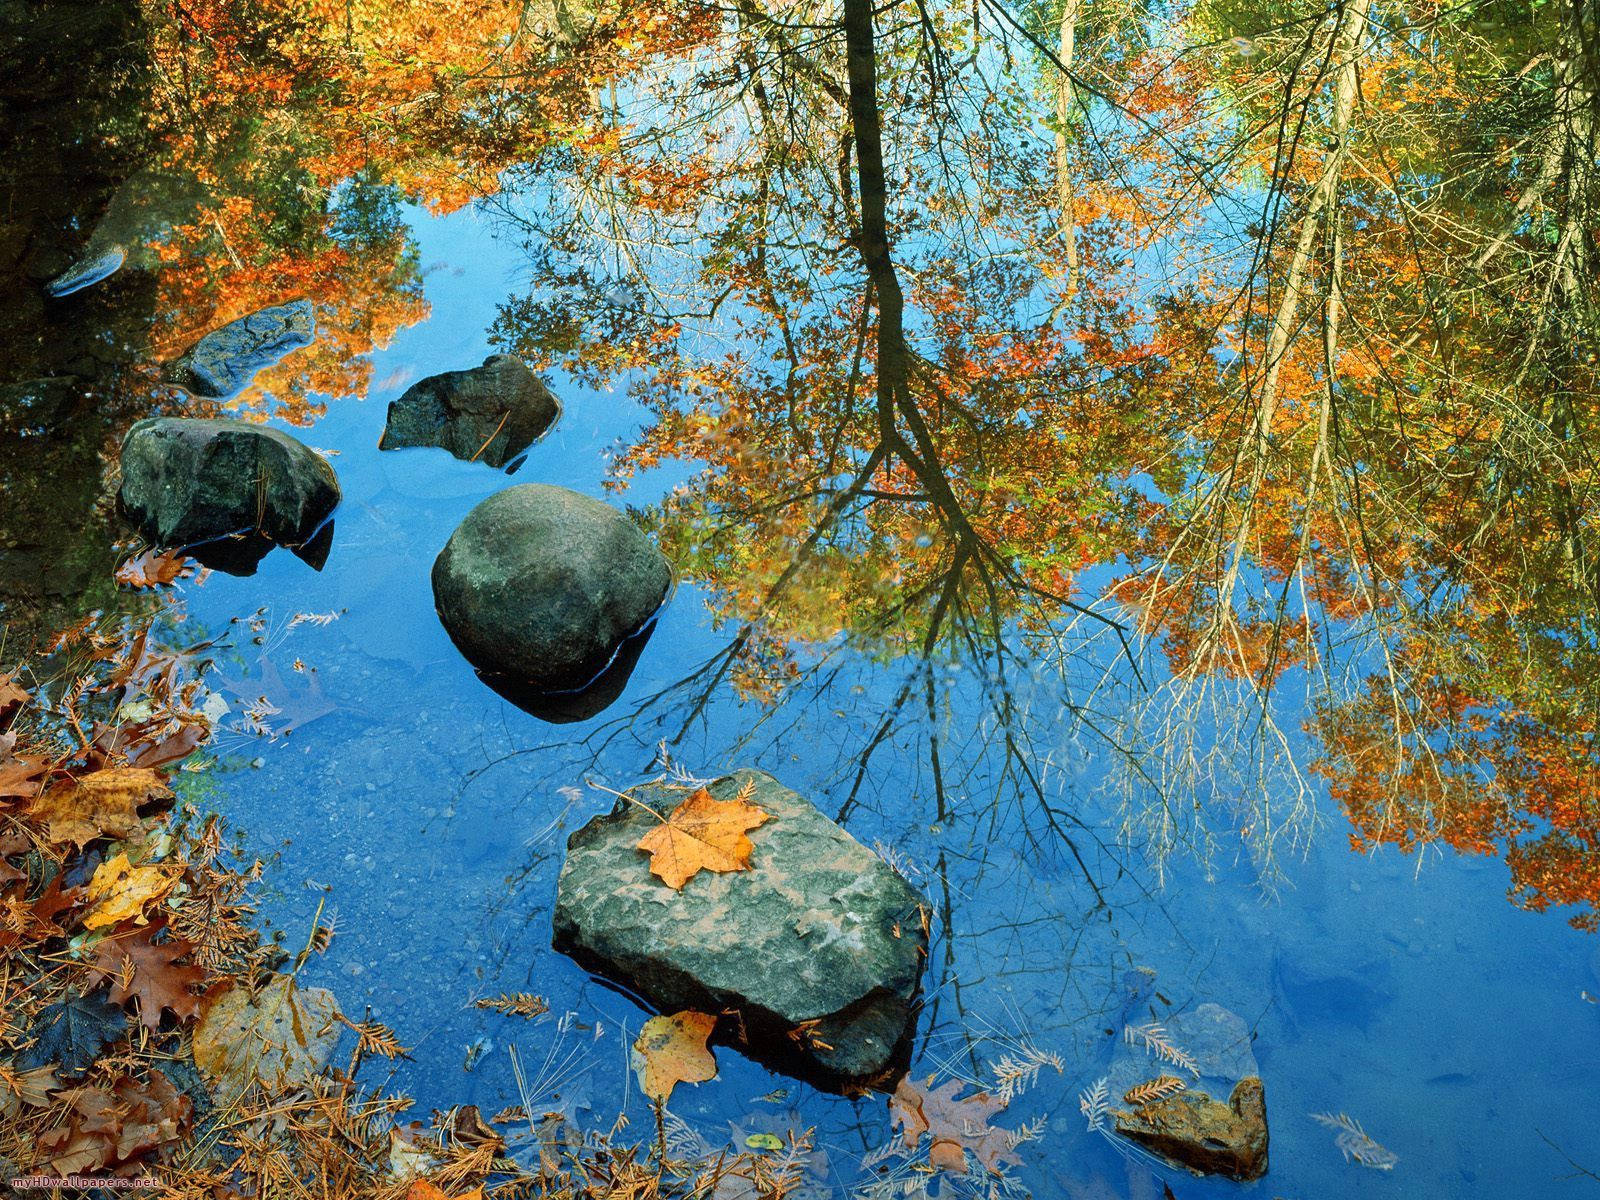 Take a moment to appreciate nature - A peaceful view of a stone on a river. Wallpaper